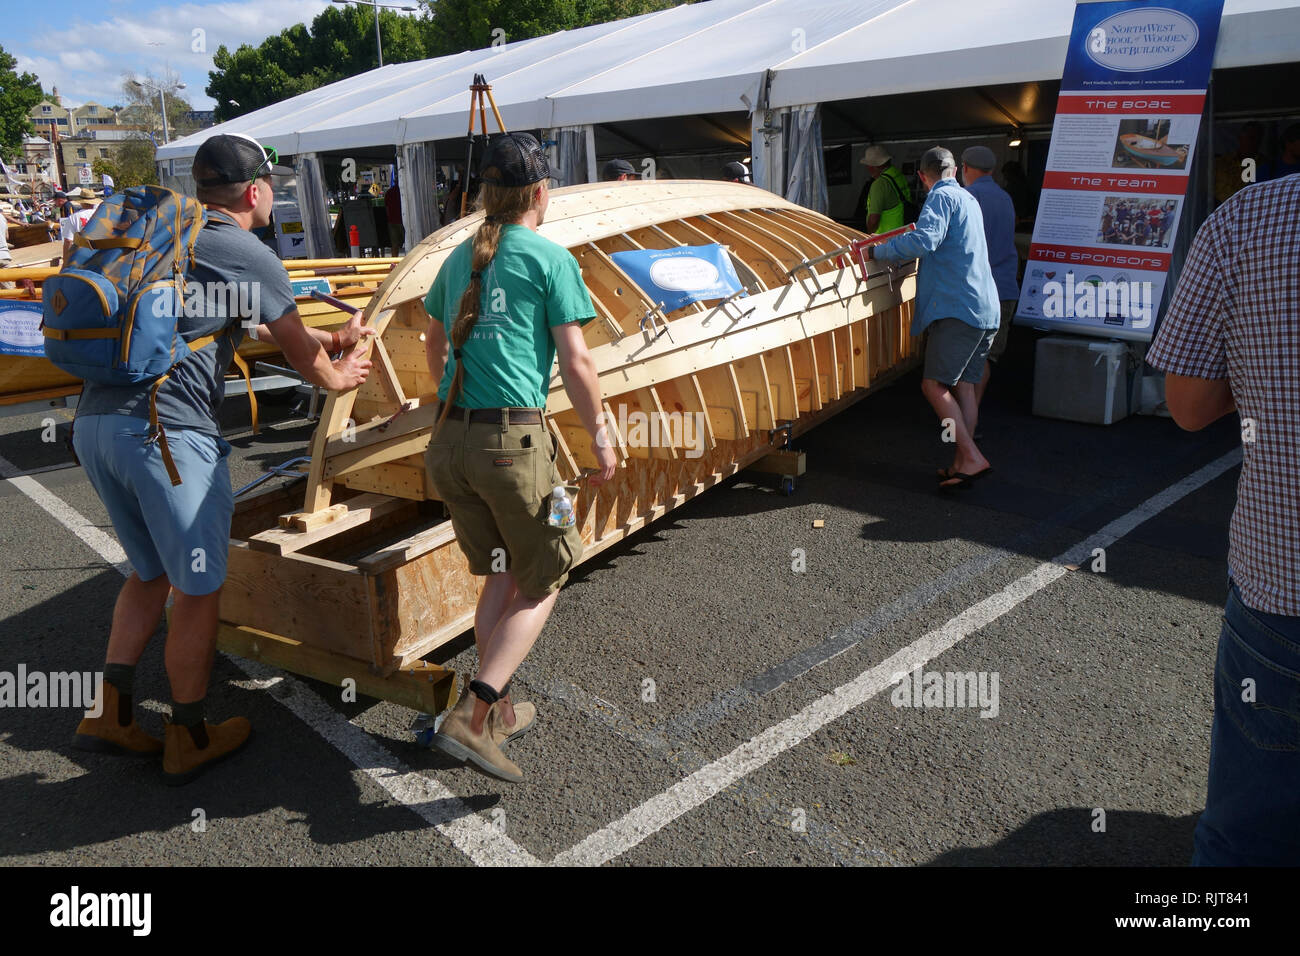 Hobart, Tasmania, Australia, 8 Feb 2019. Shipwrights and apprentices move wooden dinghy that is being hand-built during the Festival undercover in case of rain. The 2019 Australian Wooden Boat Festival celebrates historical and current shipbuilding and is one of the world’s most anticipated maritime events. Credit: Suzanne Long/Alamy Live News Stock Photo